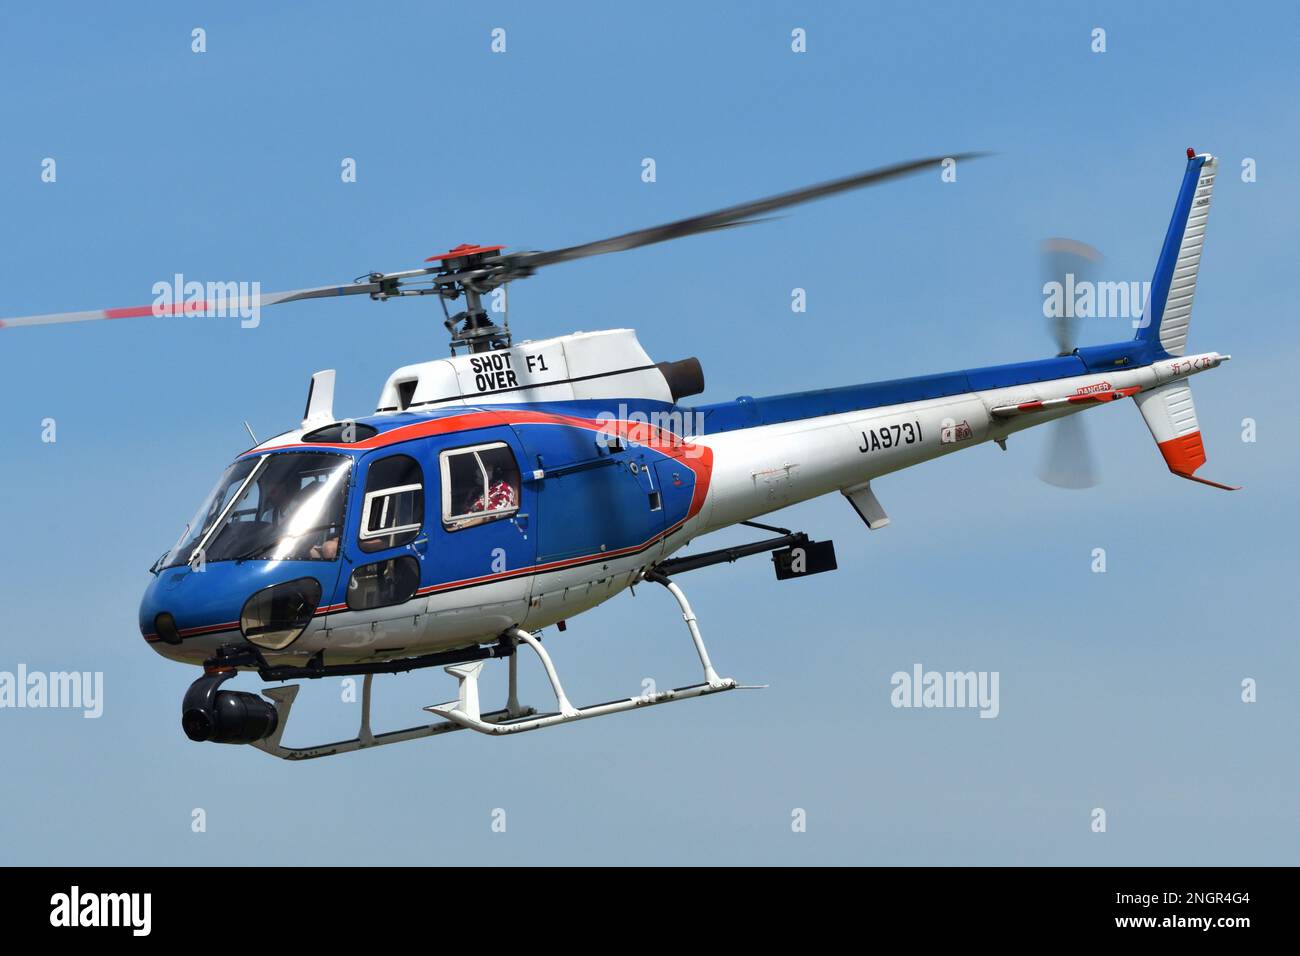 Tokyo, Japan - August 11, 2021: Akagi Helicopter Eurocopter AS350B1 Ecureuil (JA9731) light utility helicopter. Stock Photo